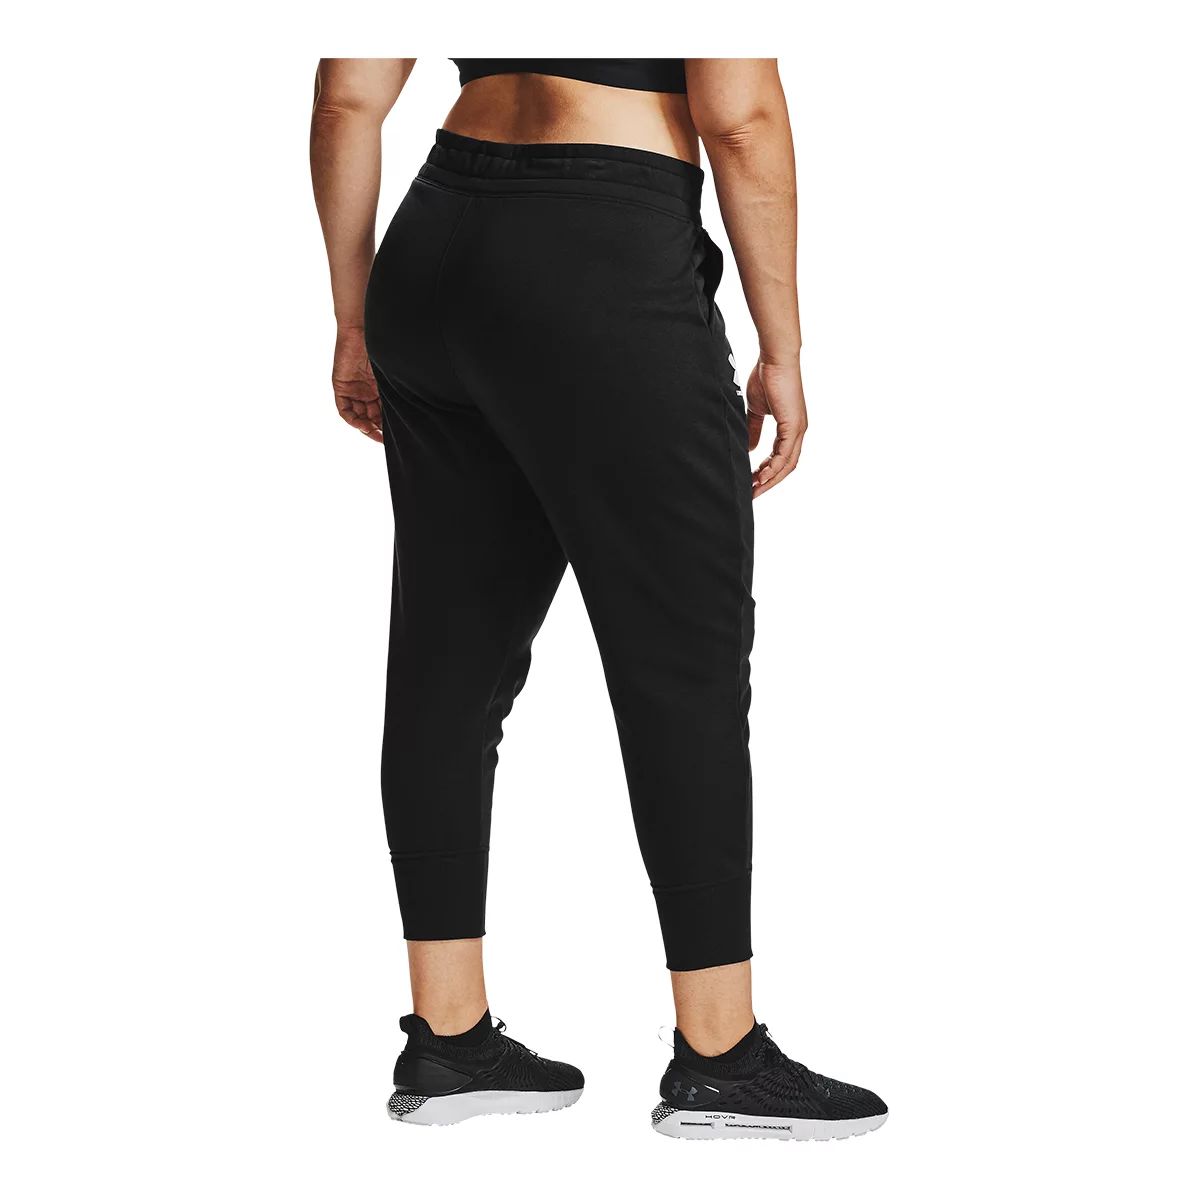 https://media-www.atmosphere.ca/product/div-03-softgoods/dpt-70-athletic-clothing/sdpt-02-womens/333463419/ua-w-plus-rival-jogger-q321-black-1x--16951fdd-b76b-42d1-bd6c-77a21e483c9d-jpgrendition.jpg?imdensity=1&imwidth=1244&impolicy=mZoom